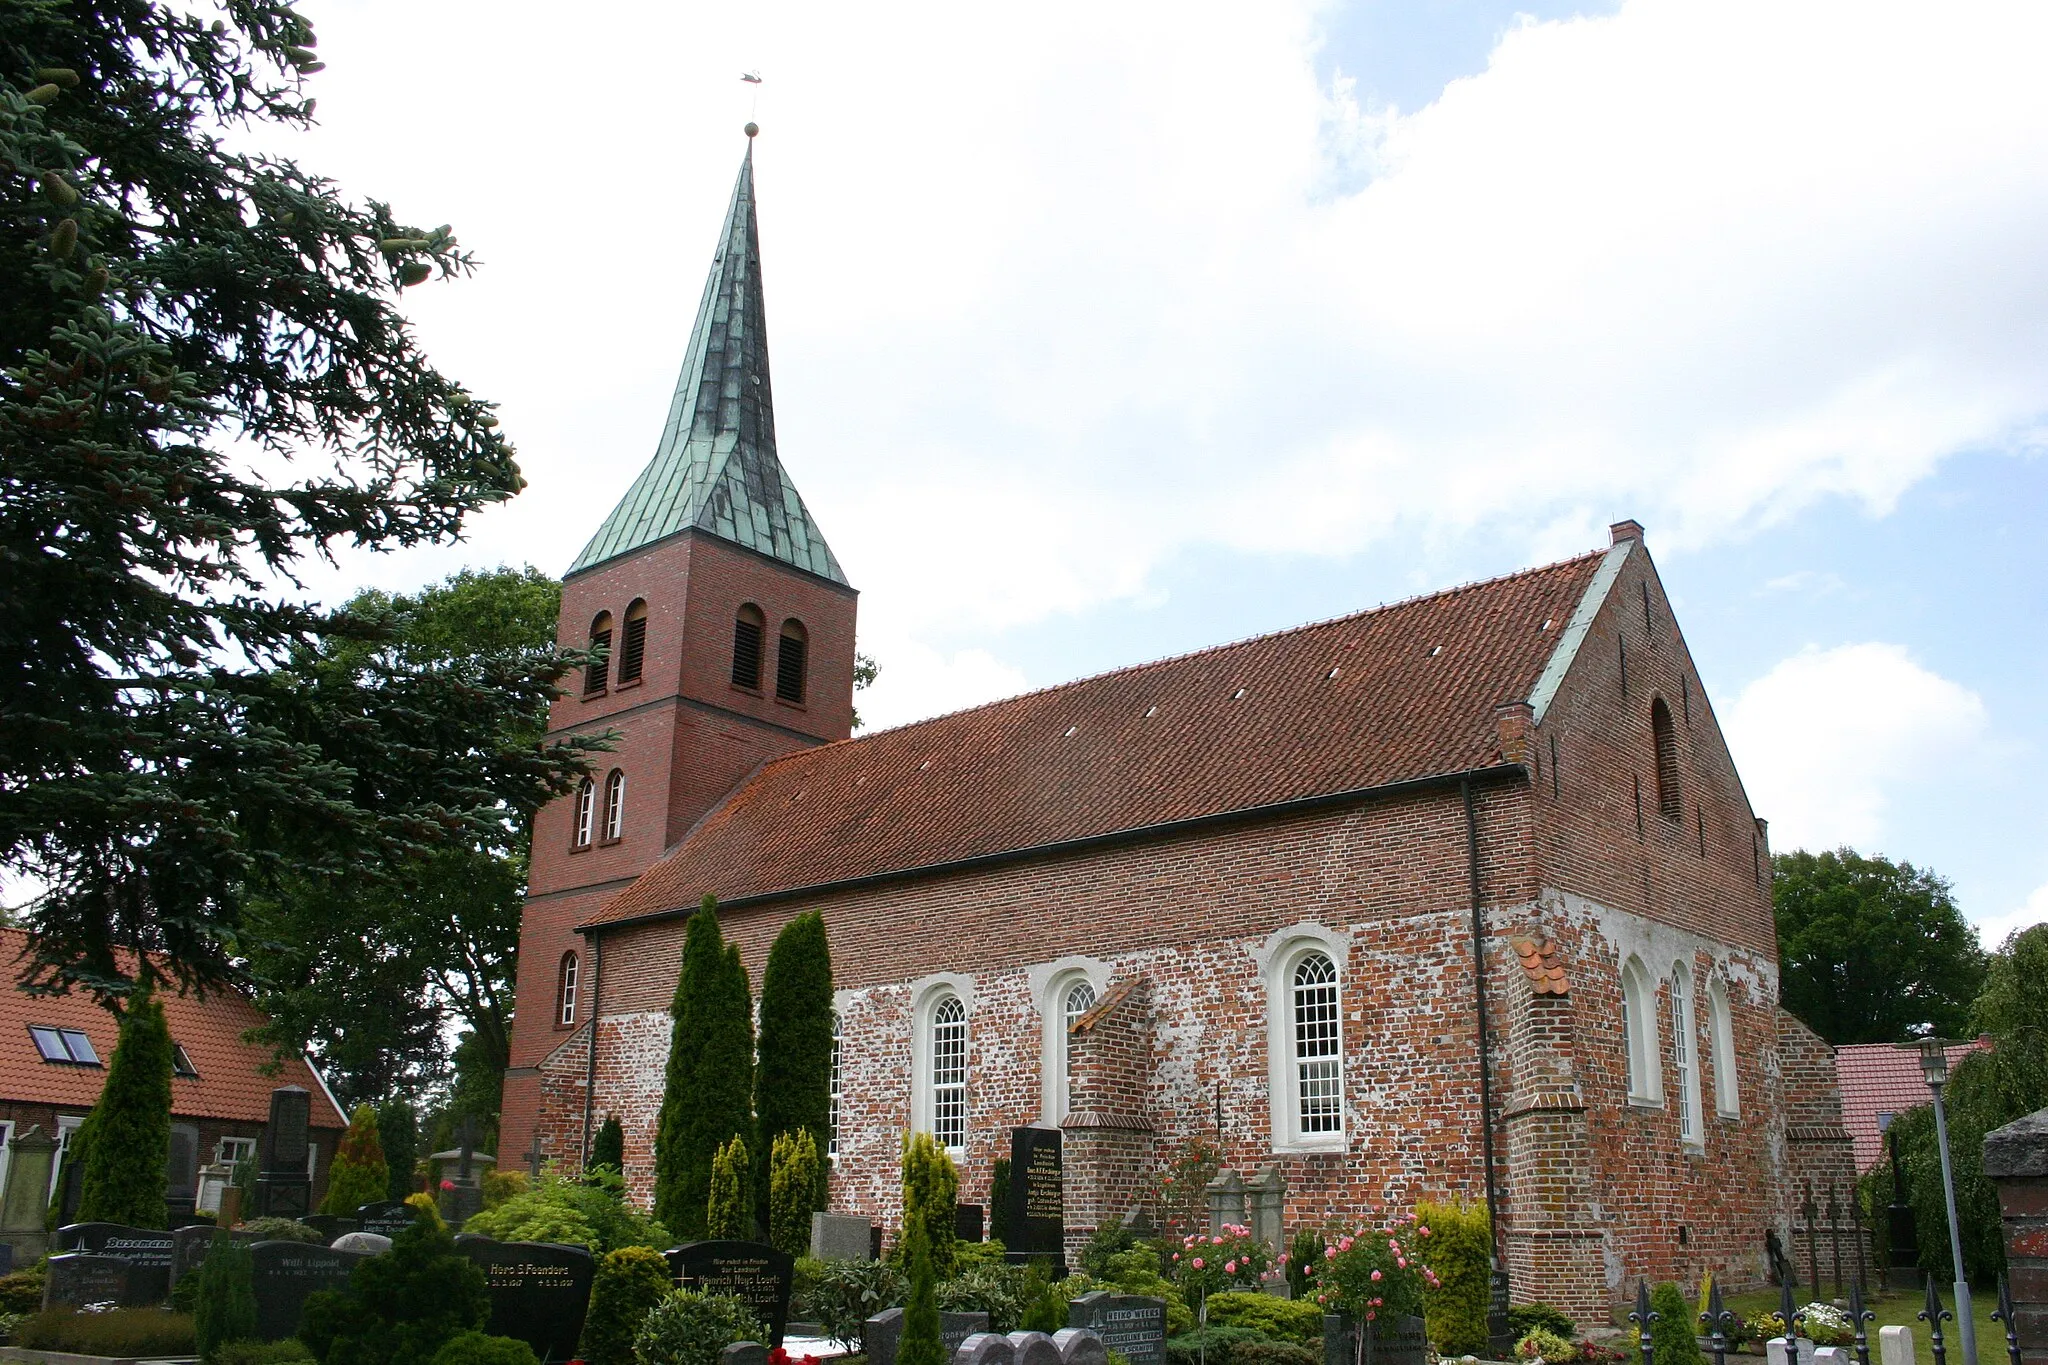 Photo showing: Historic church in Logabirum, district of Leer, East Frisia, Germany